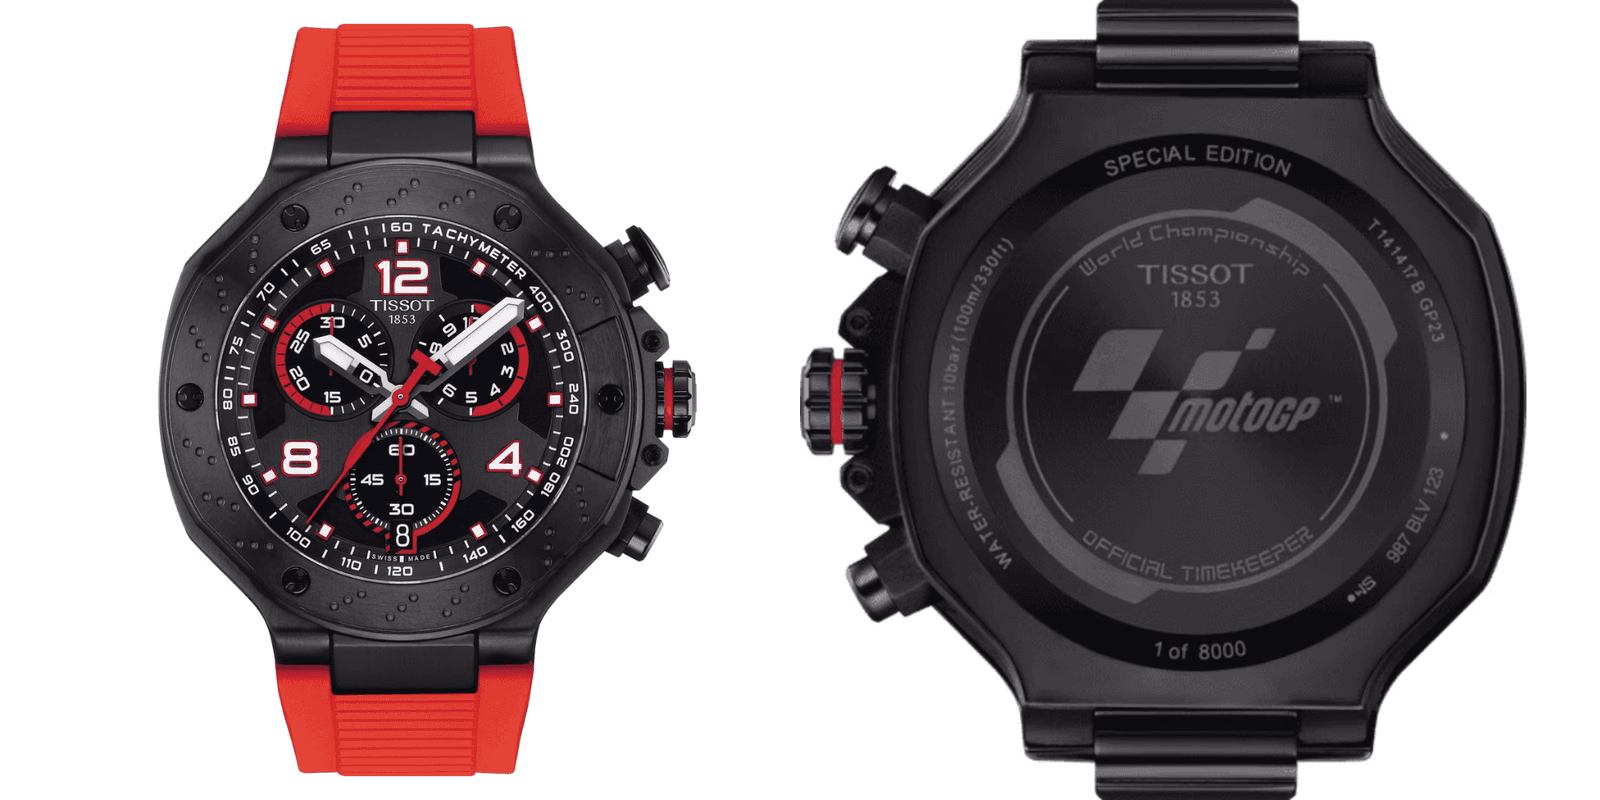 New Limited Edition watch introduced as part of the new Tissot T-Race MotoGP Collection, source - Tissot